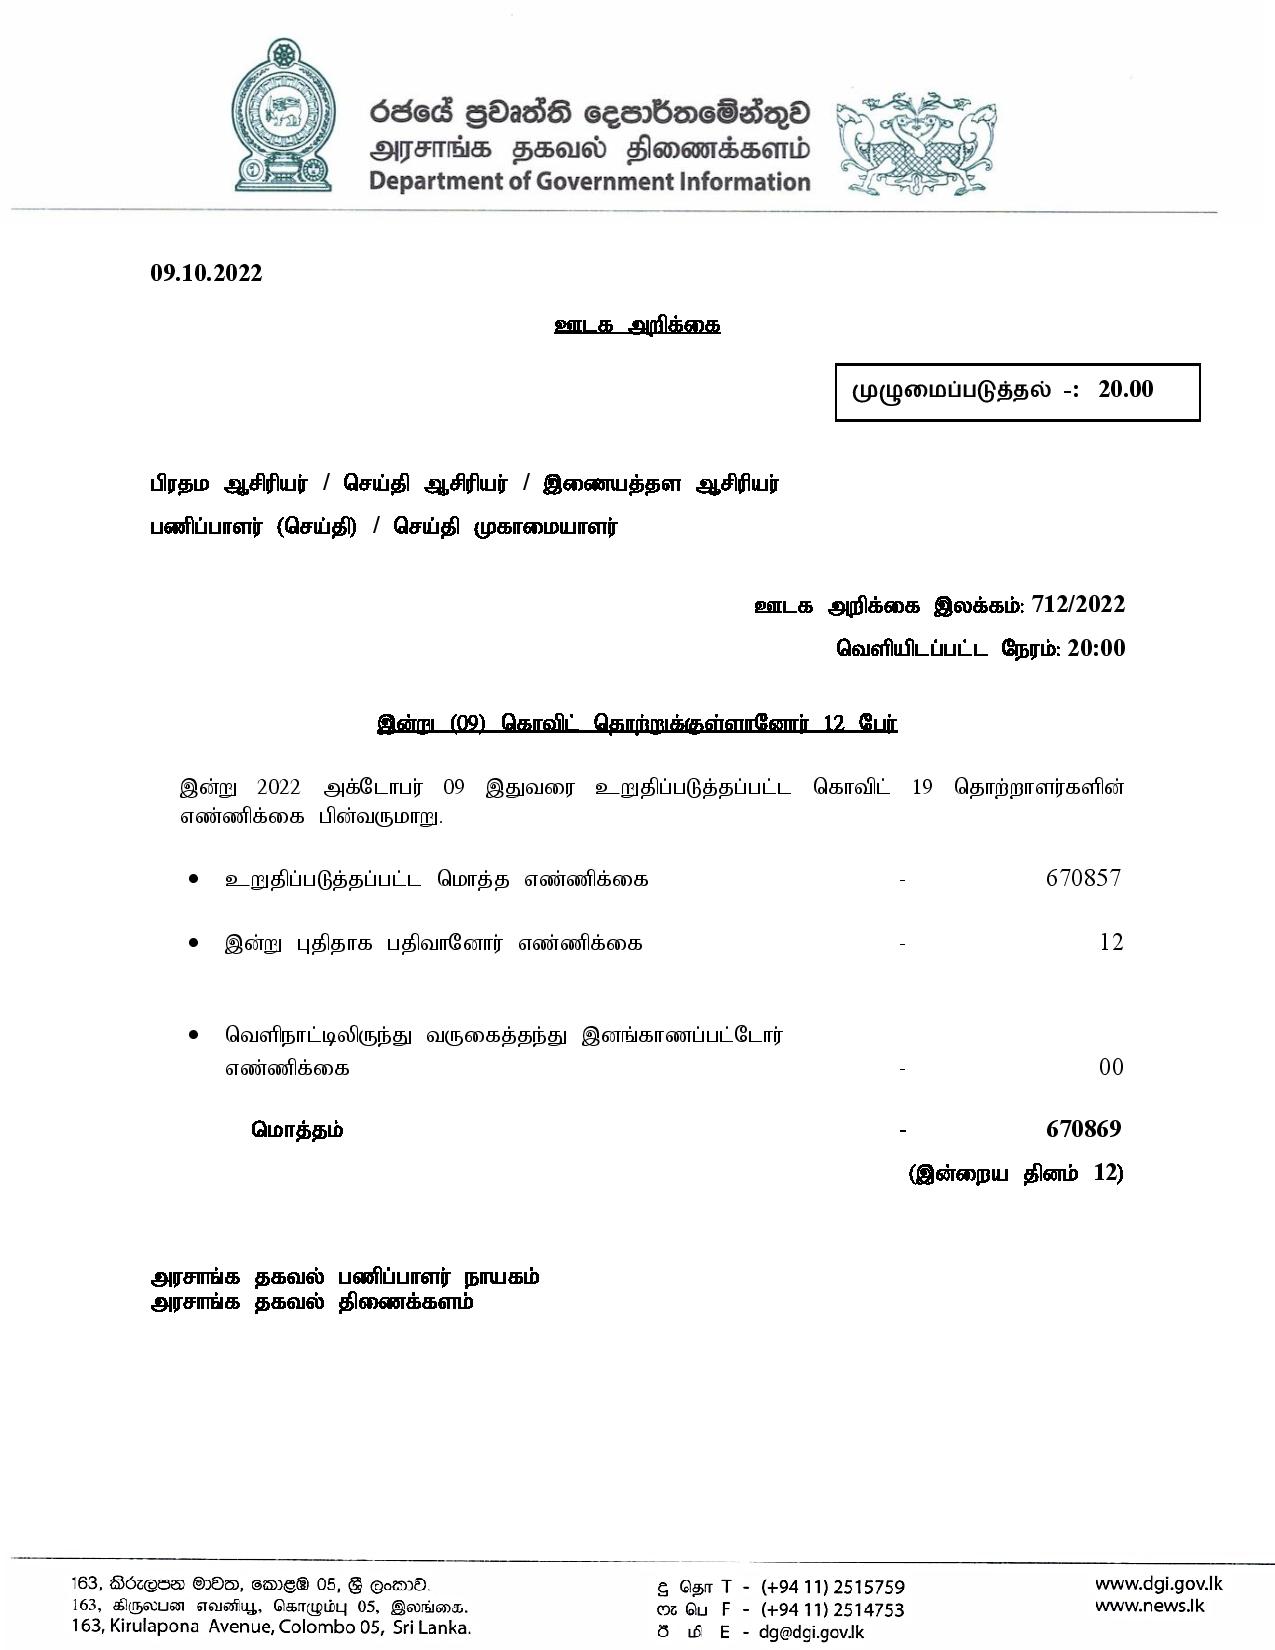 Release No 712 Tamil page 001